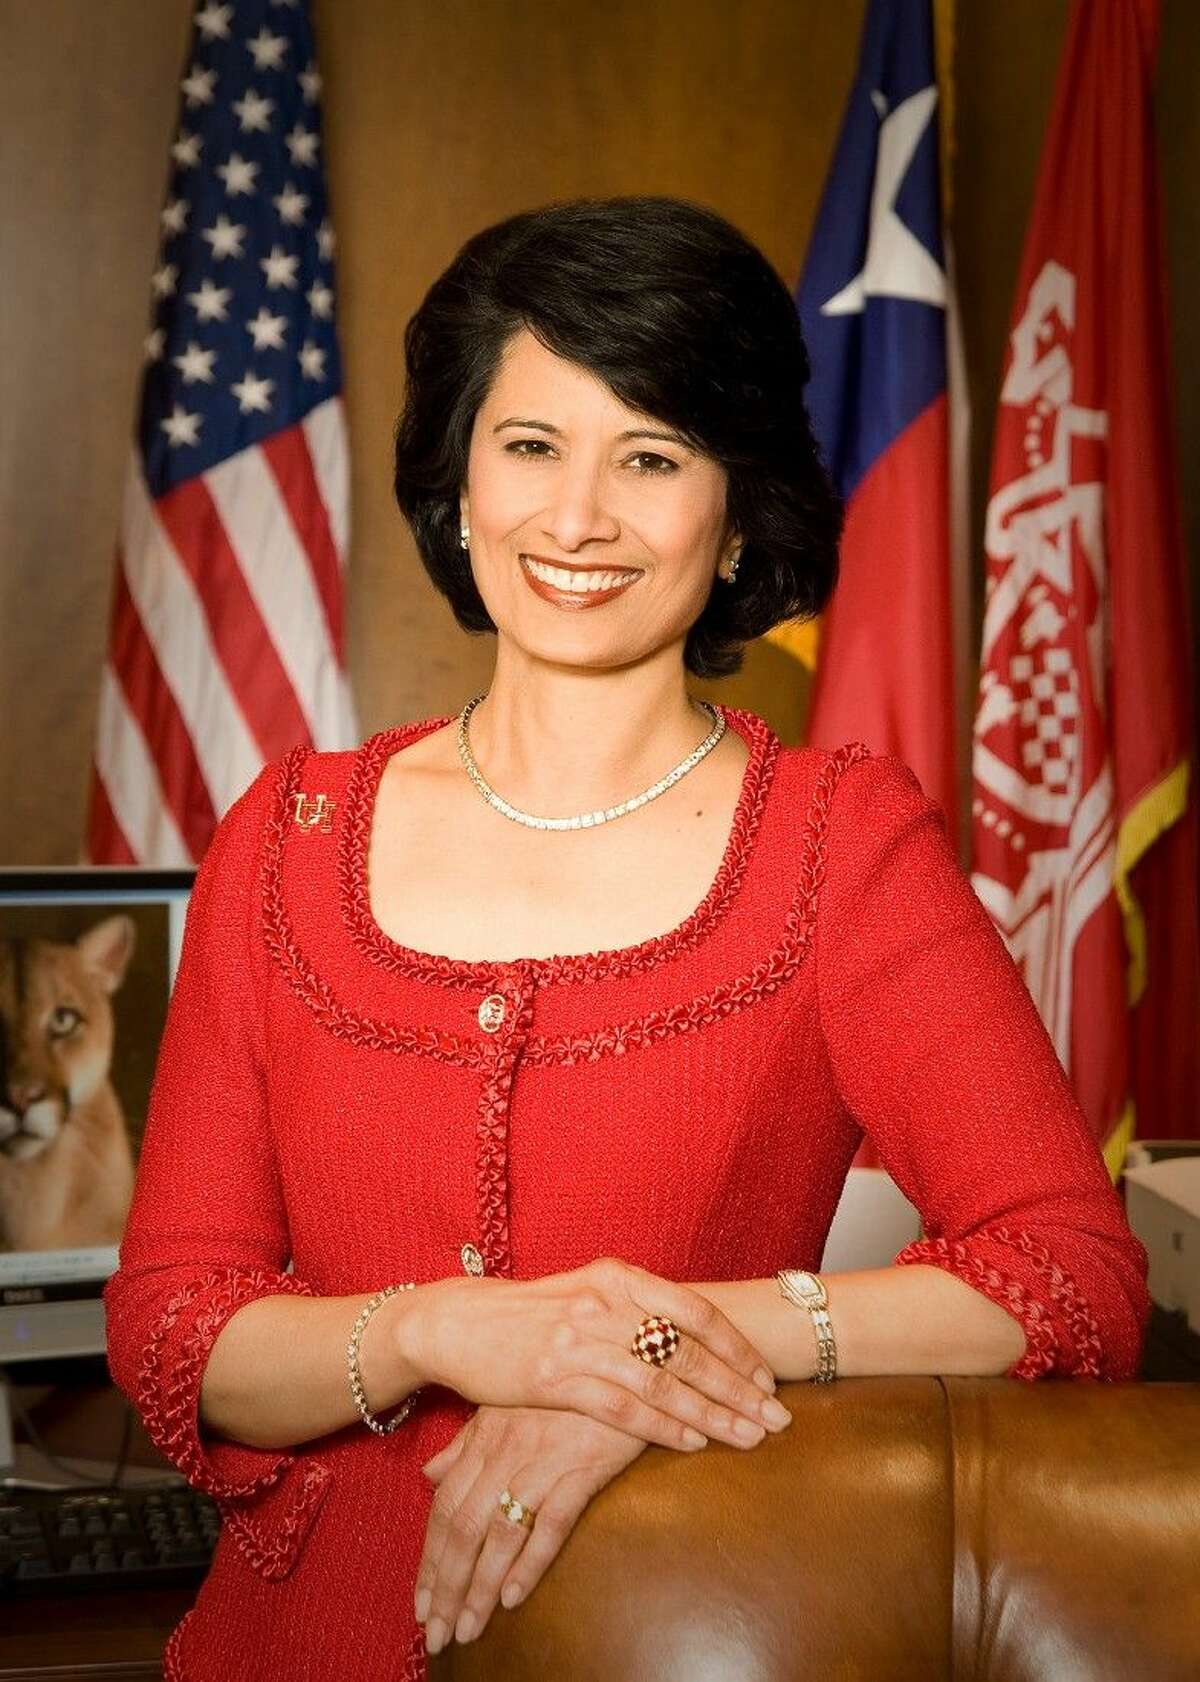 University of Houston President and UH System Chancellor Renu Khator is set to lead the board of directors for the Federal Reserve Bank of Dallas.